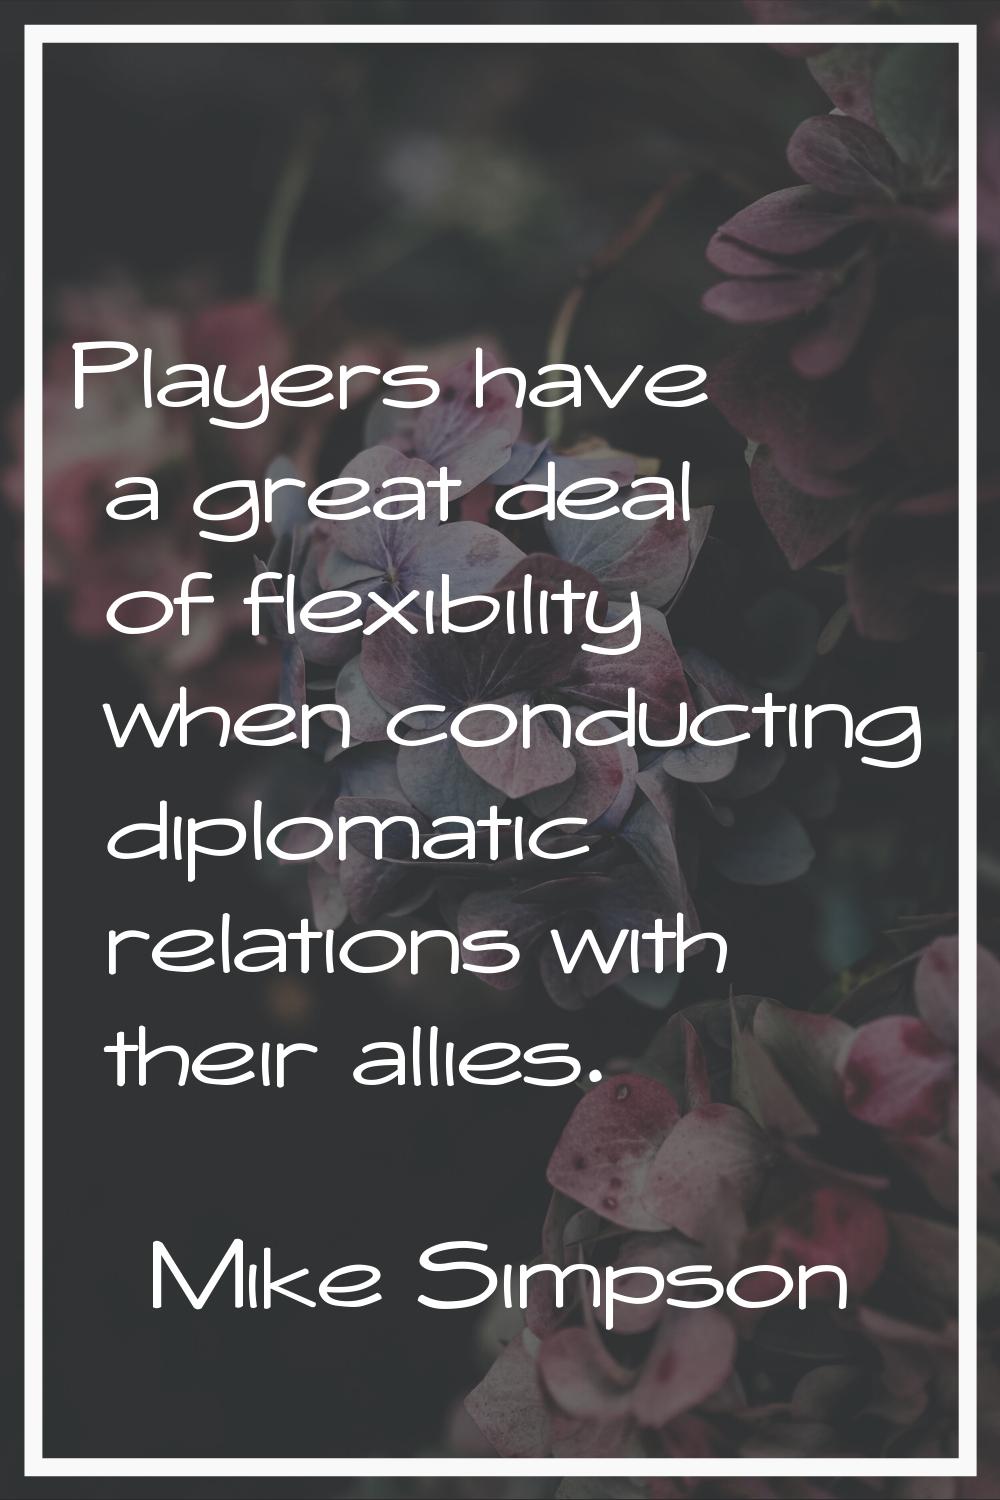 Players have a great deal of flexibility when conducting diplomatic relations with their allies.